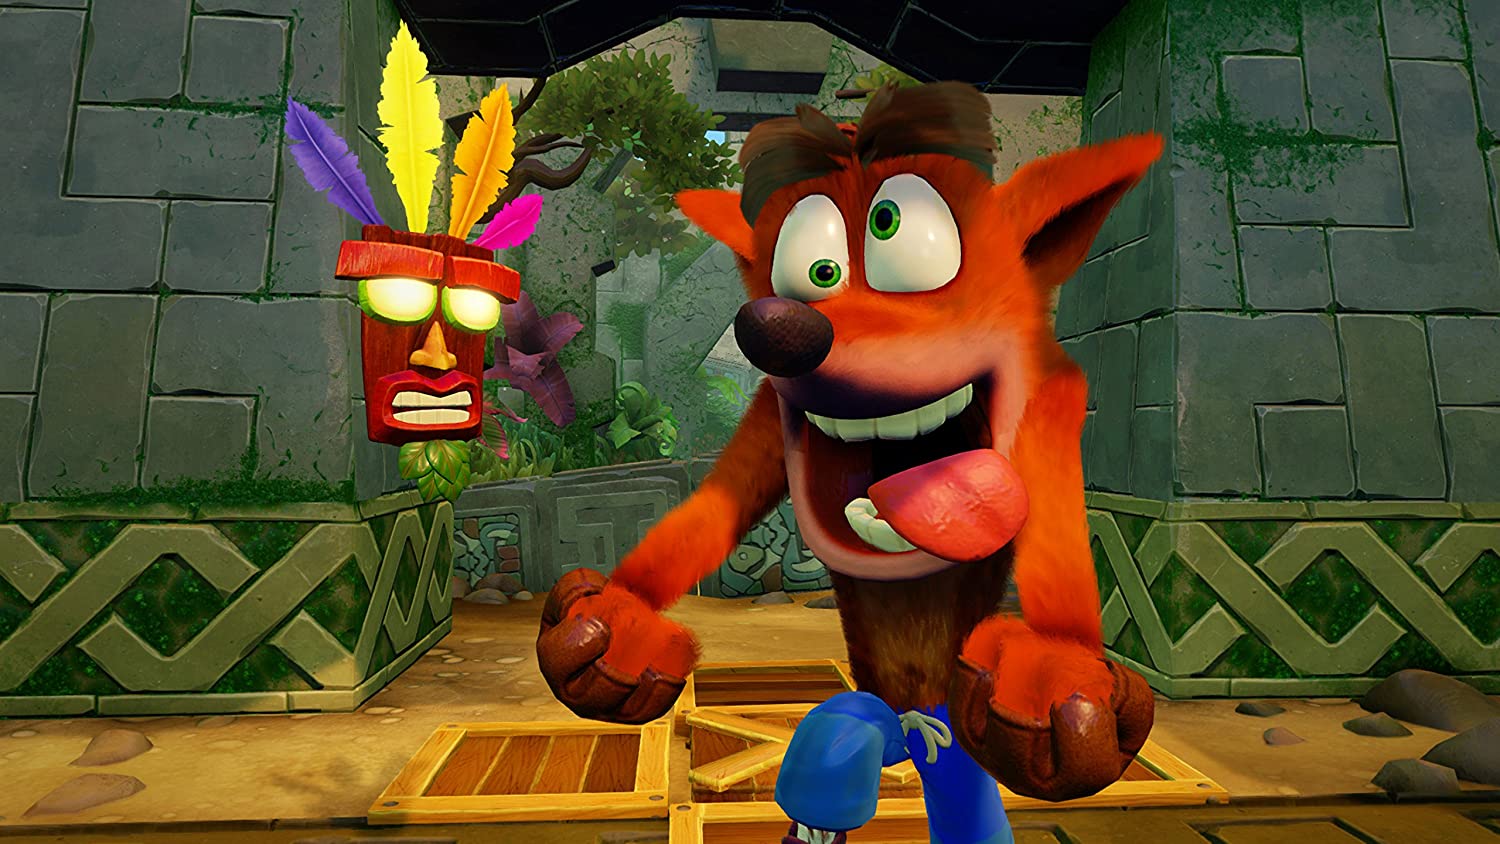 metacritic on Twitter: "Crash Bandicoot N.Sane [PS4 - 80] https://t.co/vTI8RMpUF4 "The orange smasher returns better than in this lovingly-crafted remaster." - Games UK https://t.co/1IUz7bZTDn" / Twitter